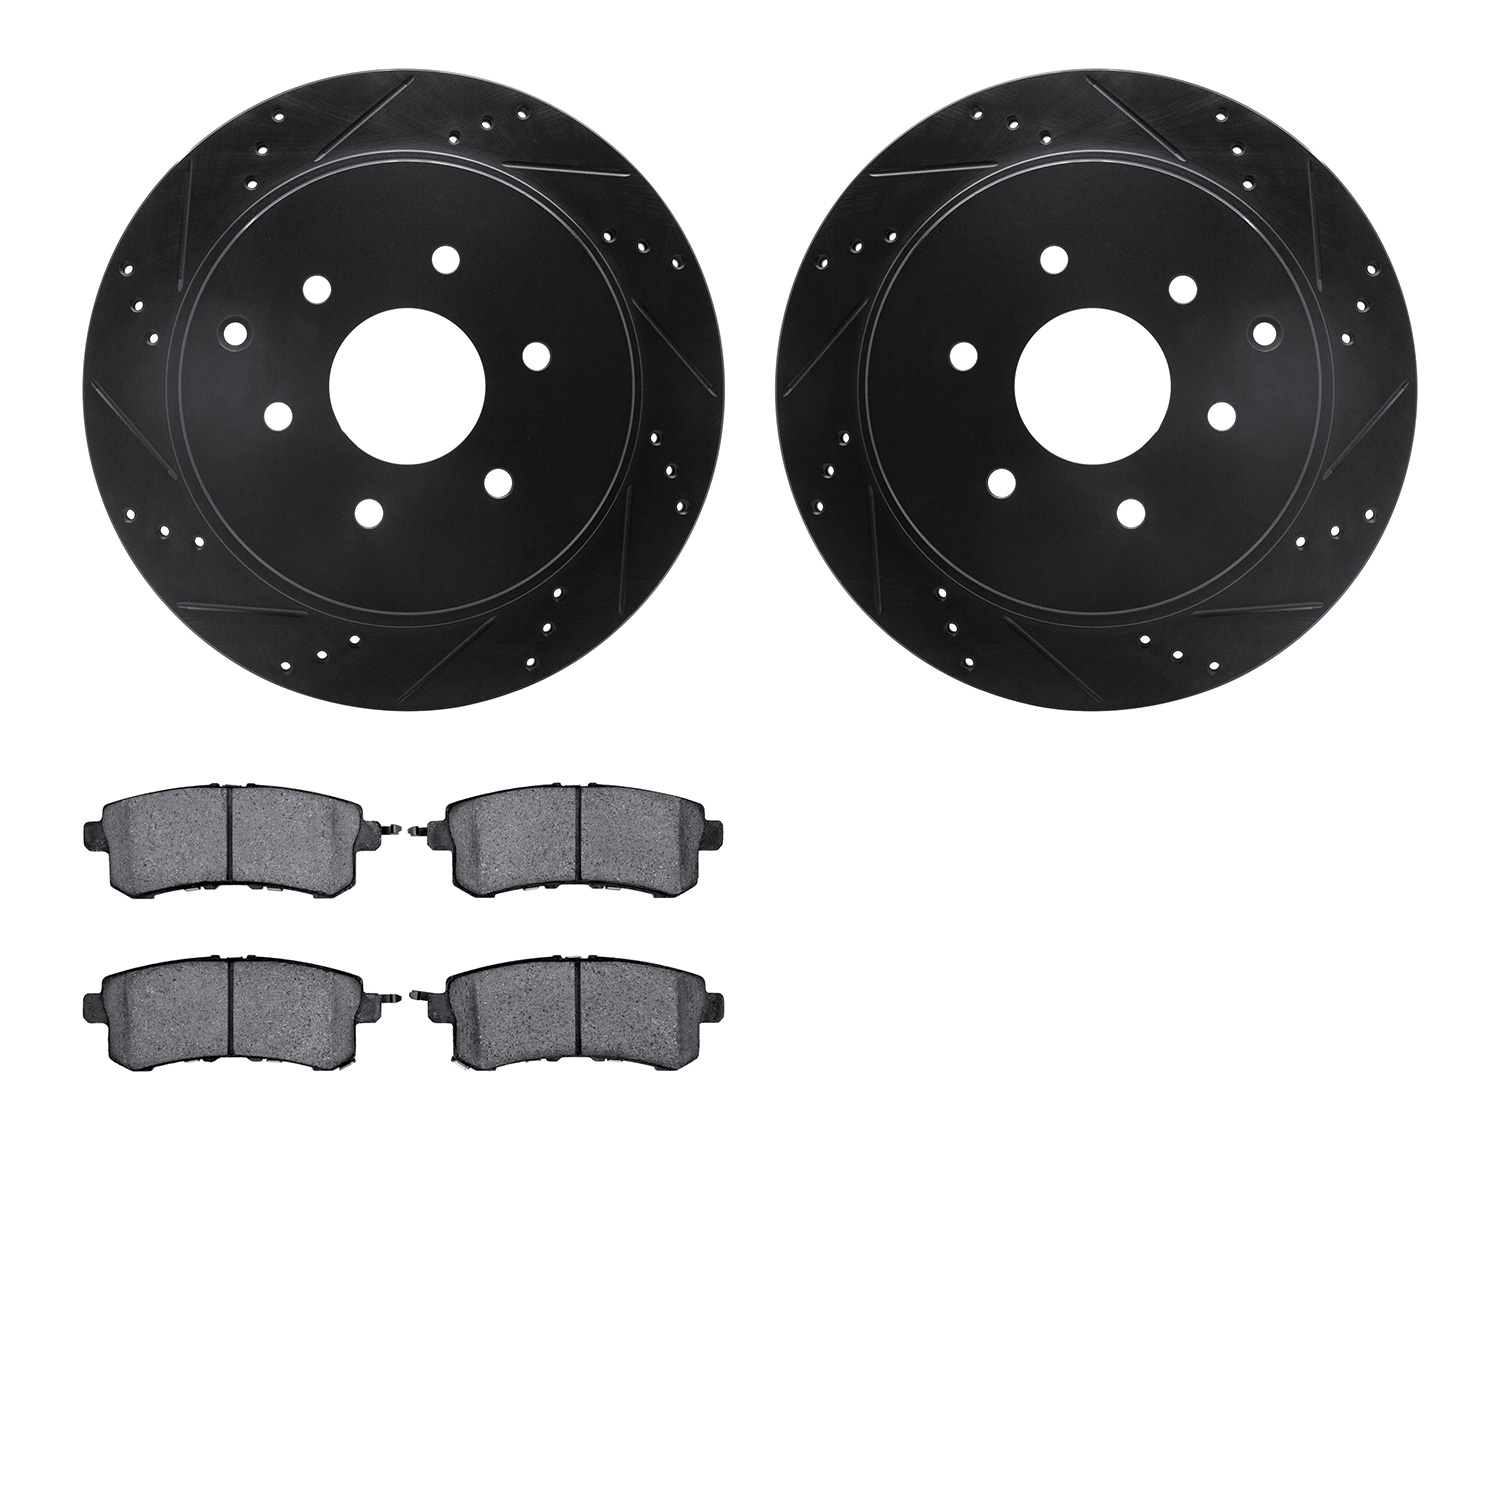 8302-68019 Drilled/Slotted Brake Rotors with 3000-Series Ceramic Brake Pads Kit [Black], Fits Select Infiniti/Nissan, Position: